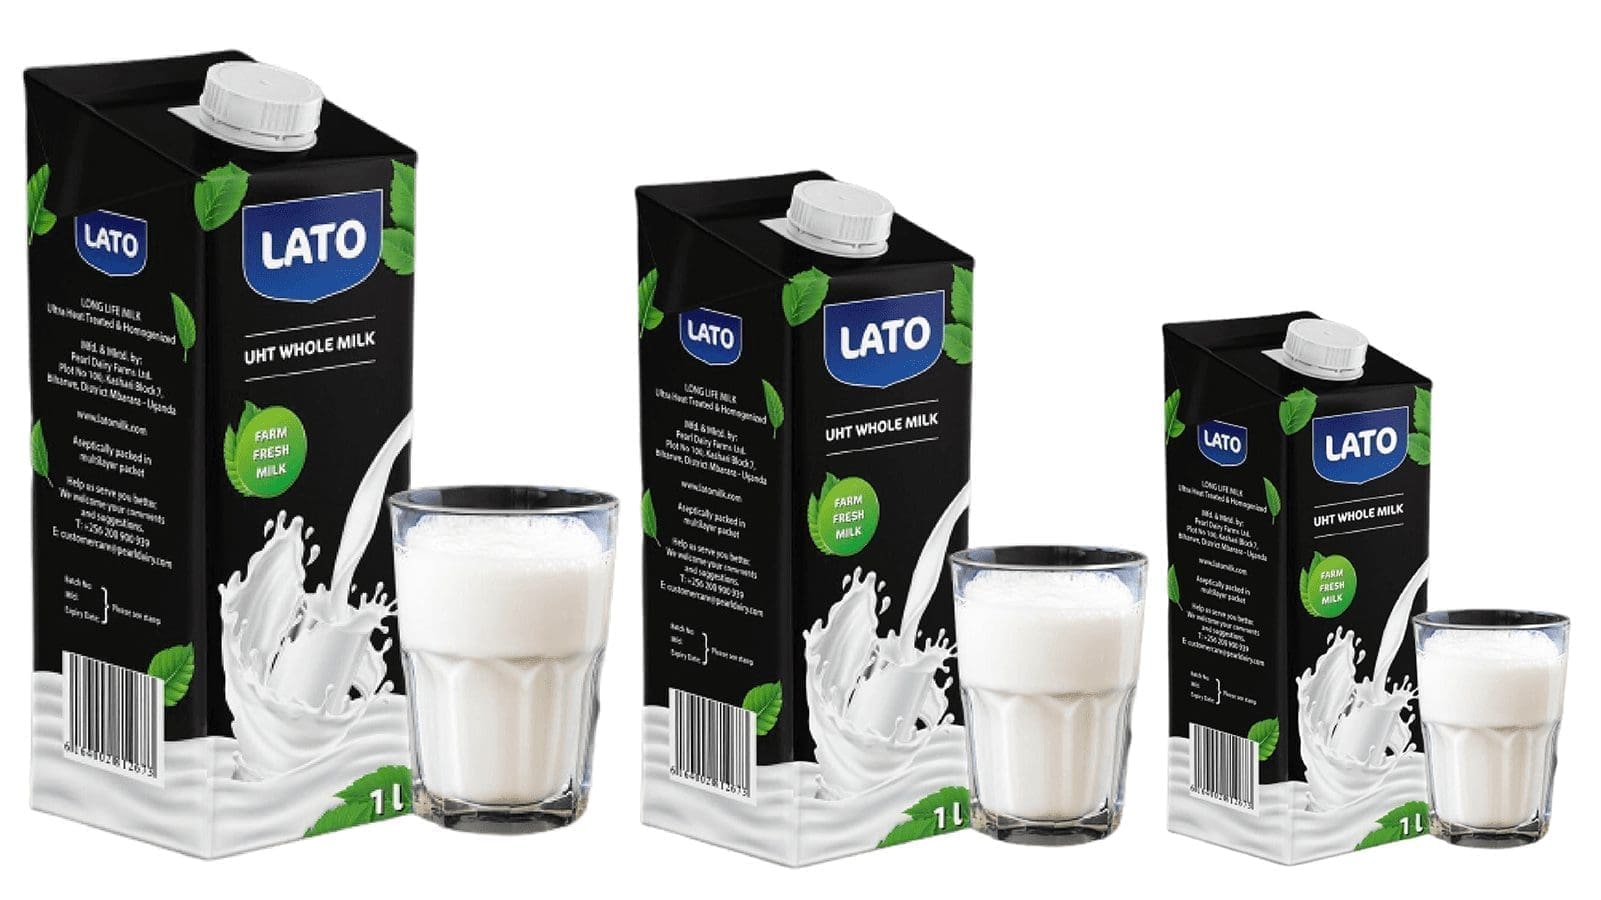 African milk processors Pearl Dairy, Blue Boat drive innovation in dairy sector with launch of new products